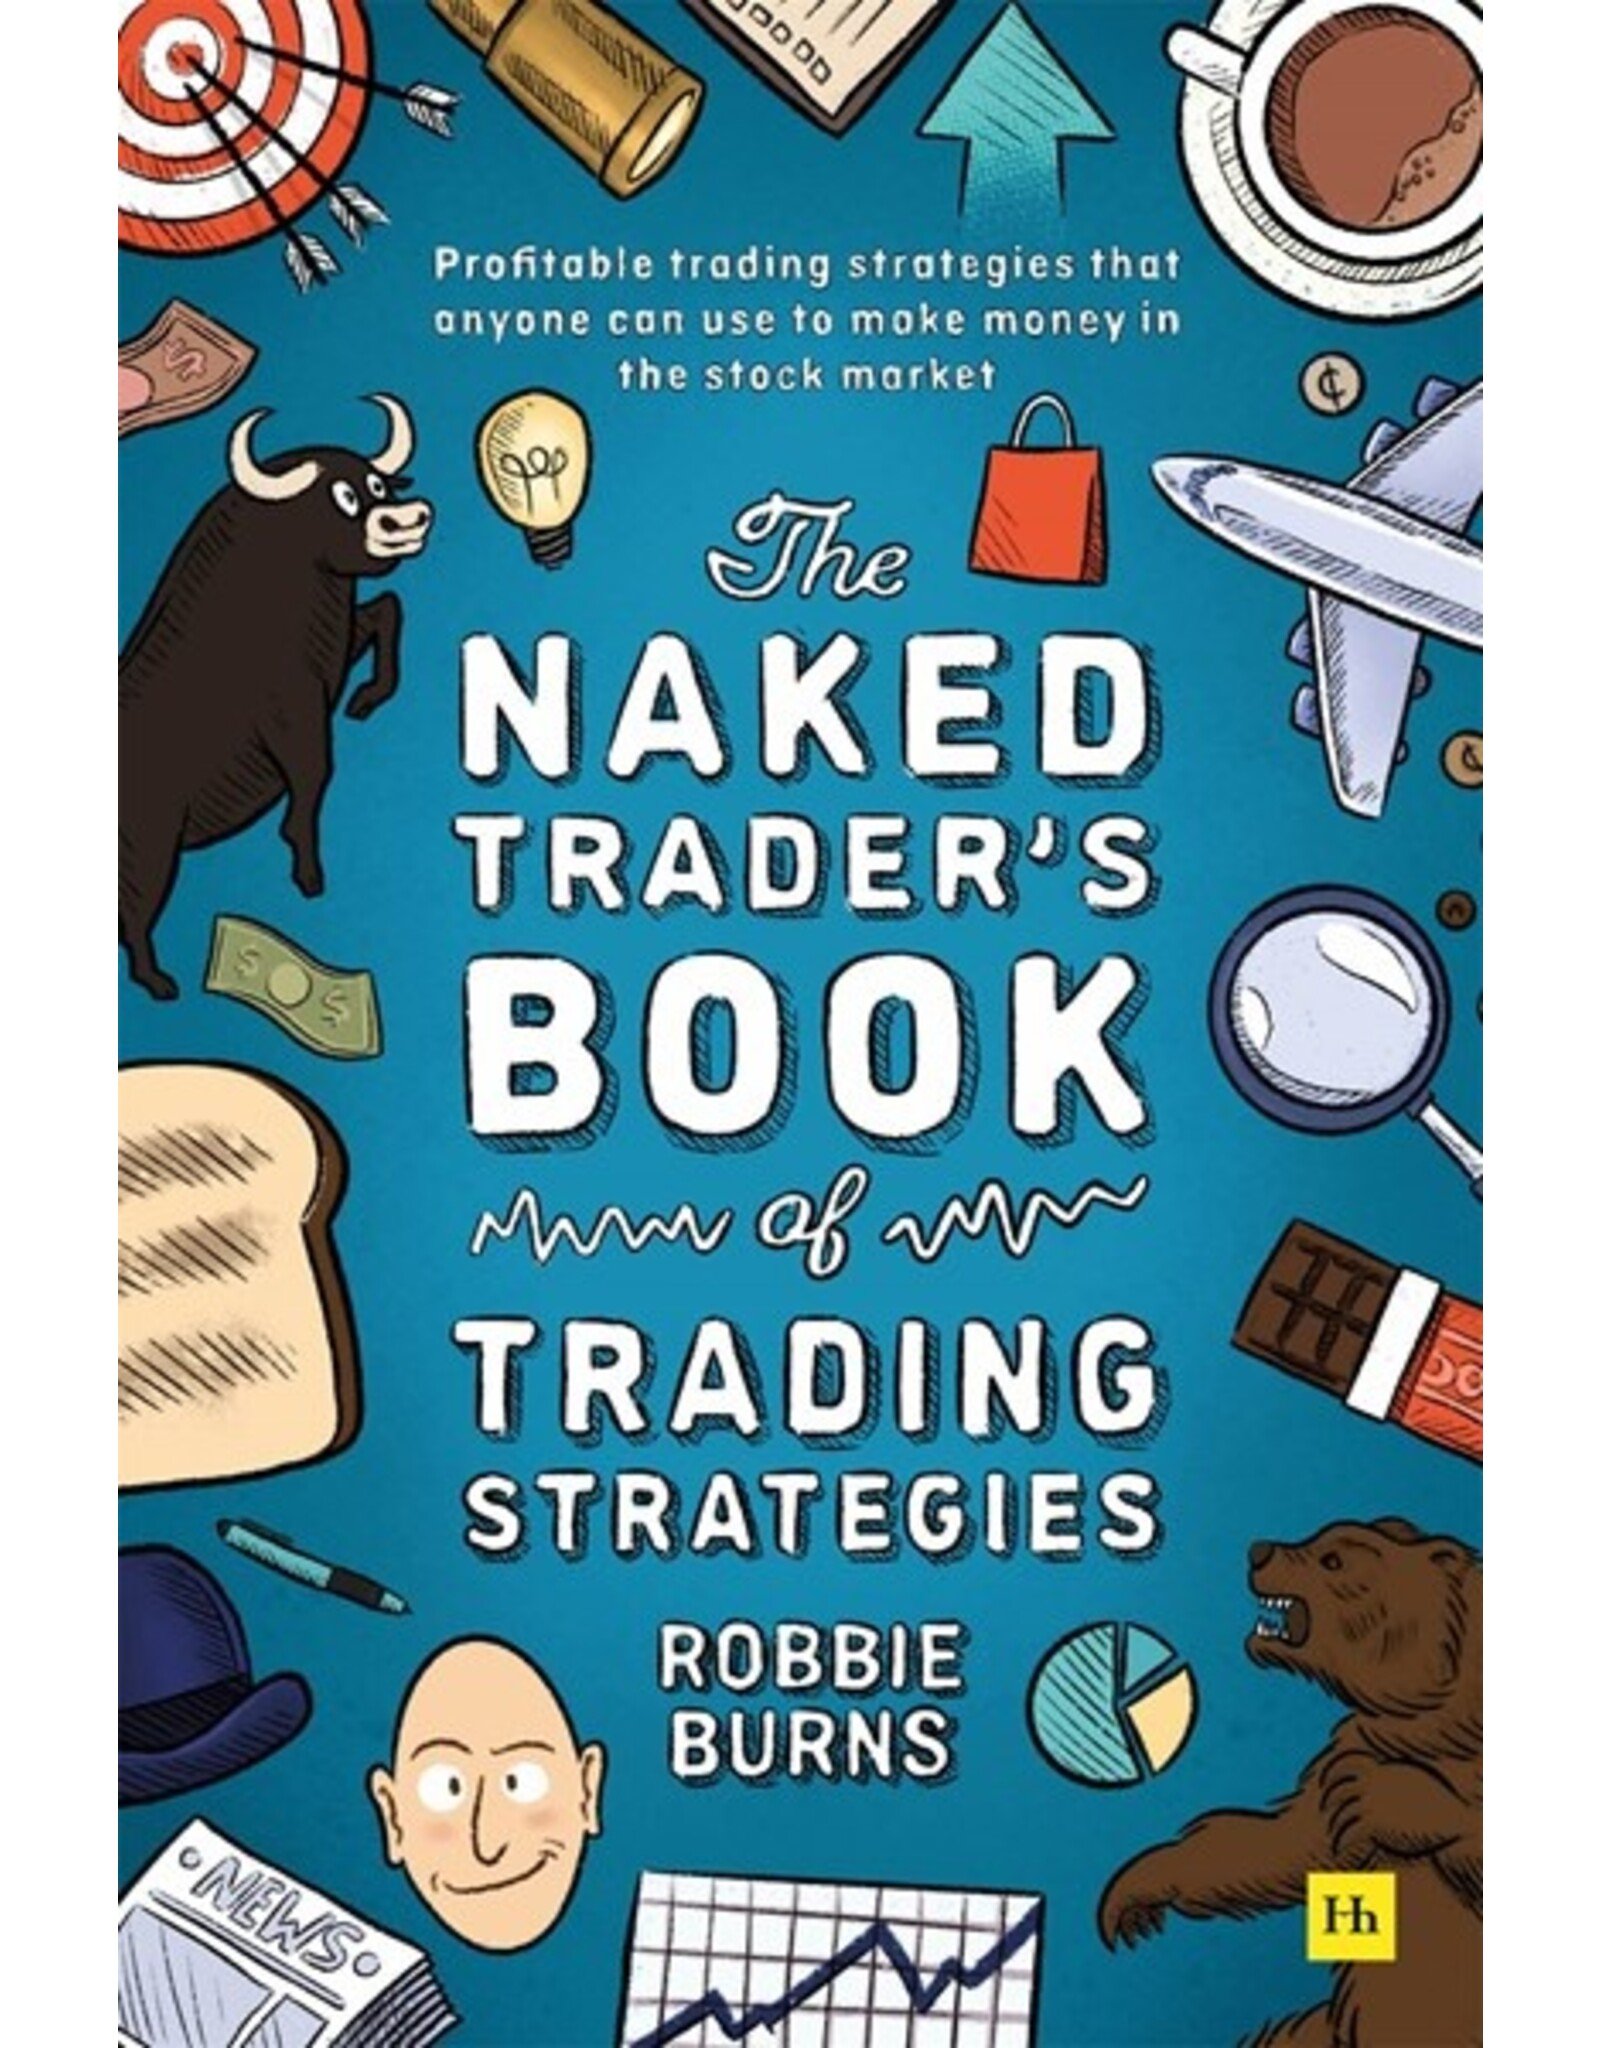 Books The Naked Trader's Book of Trading Strategies by Robbie Burns